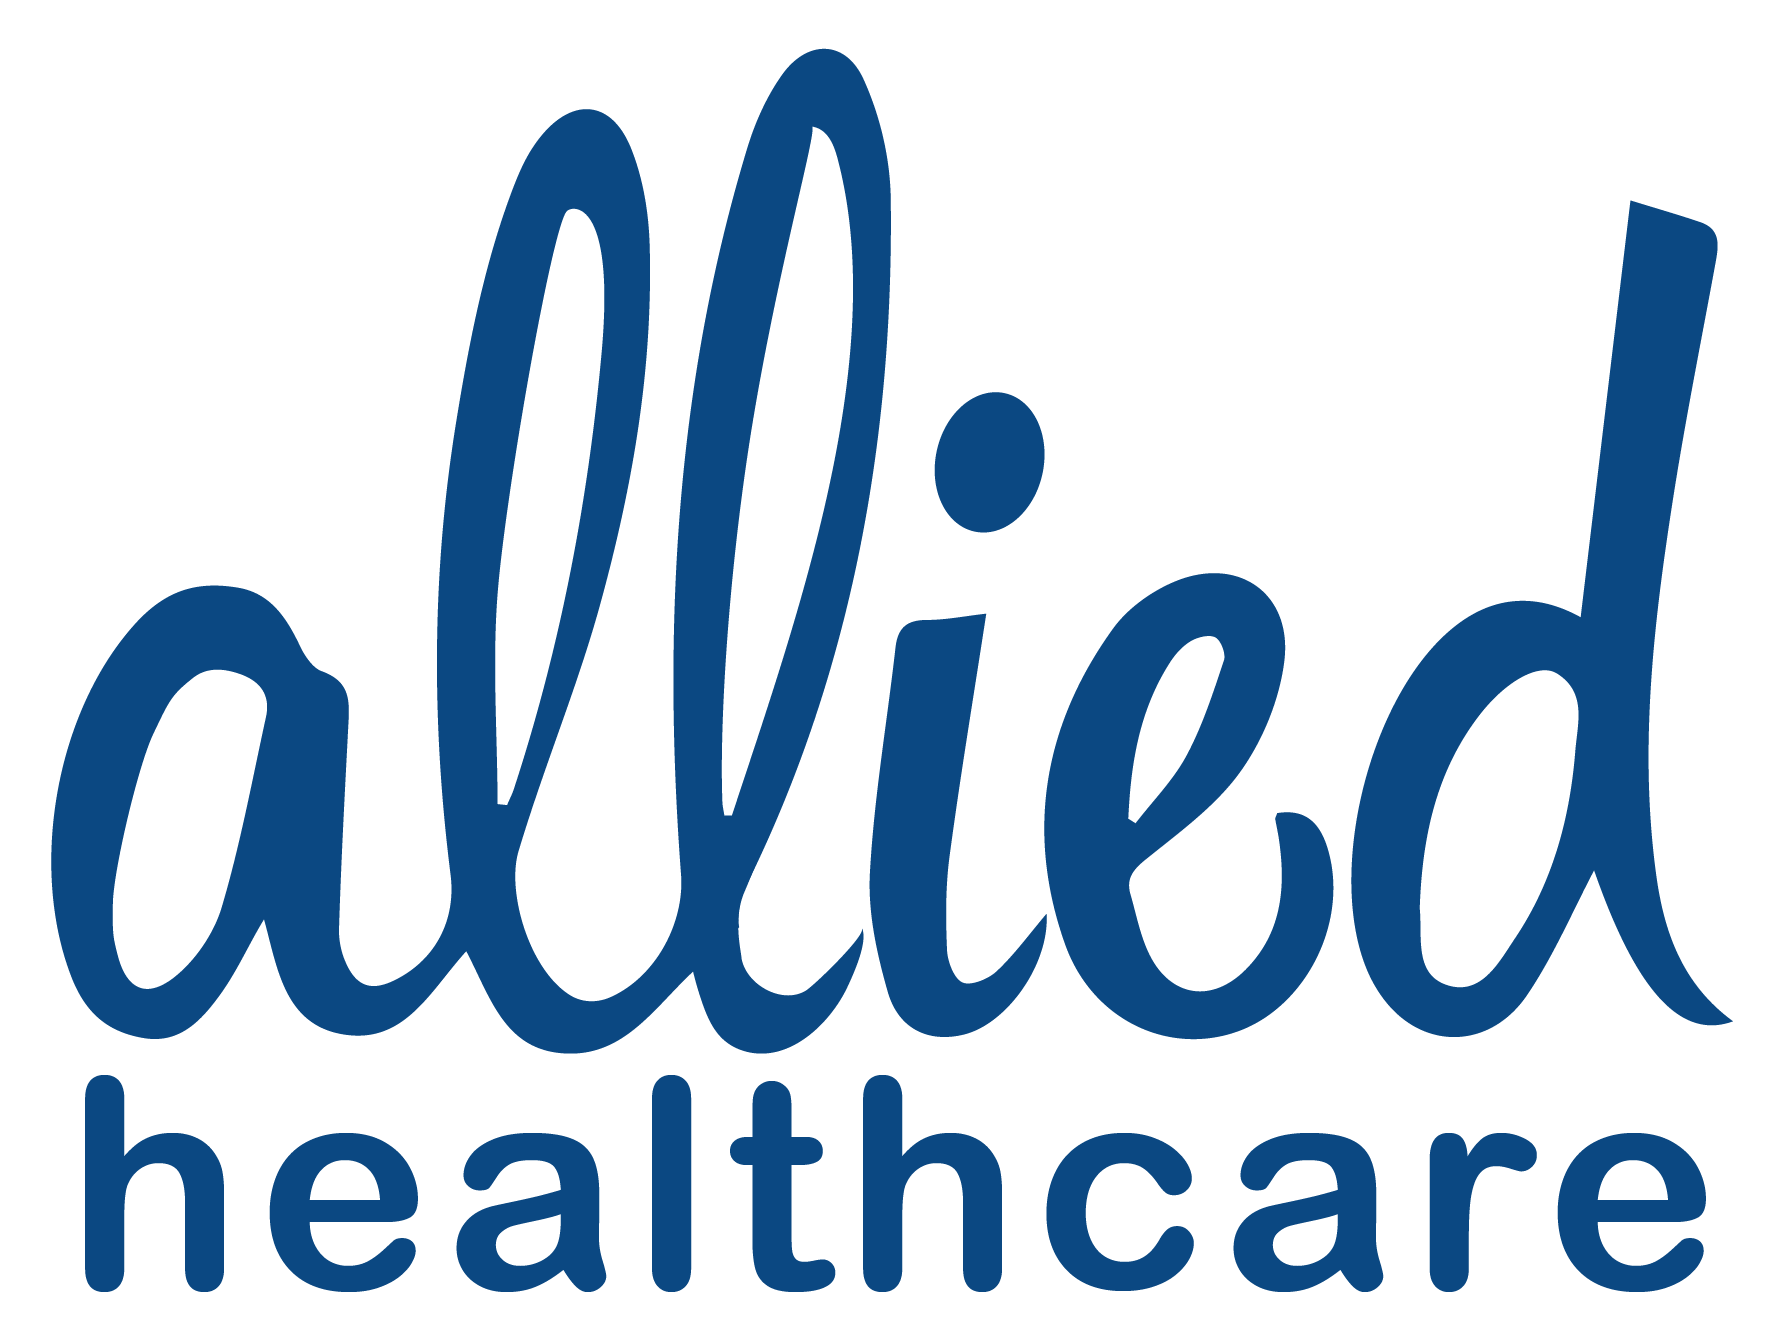 Care.com Logo - Allied Healthcare | Care and support services to live your life ...